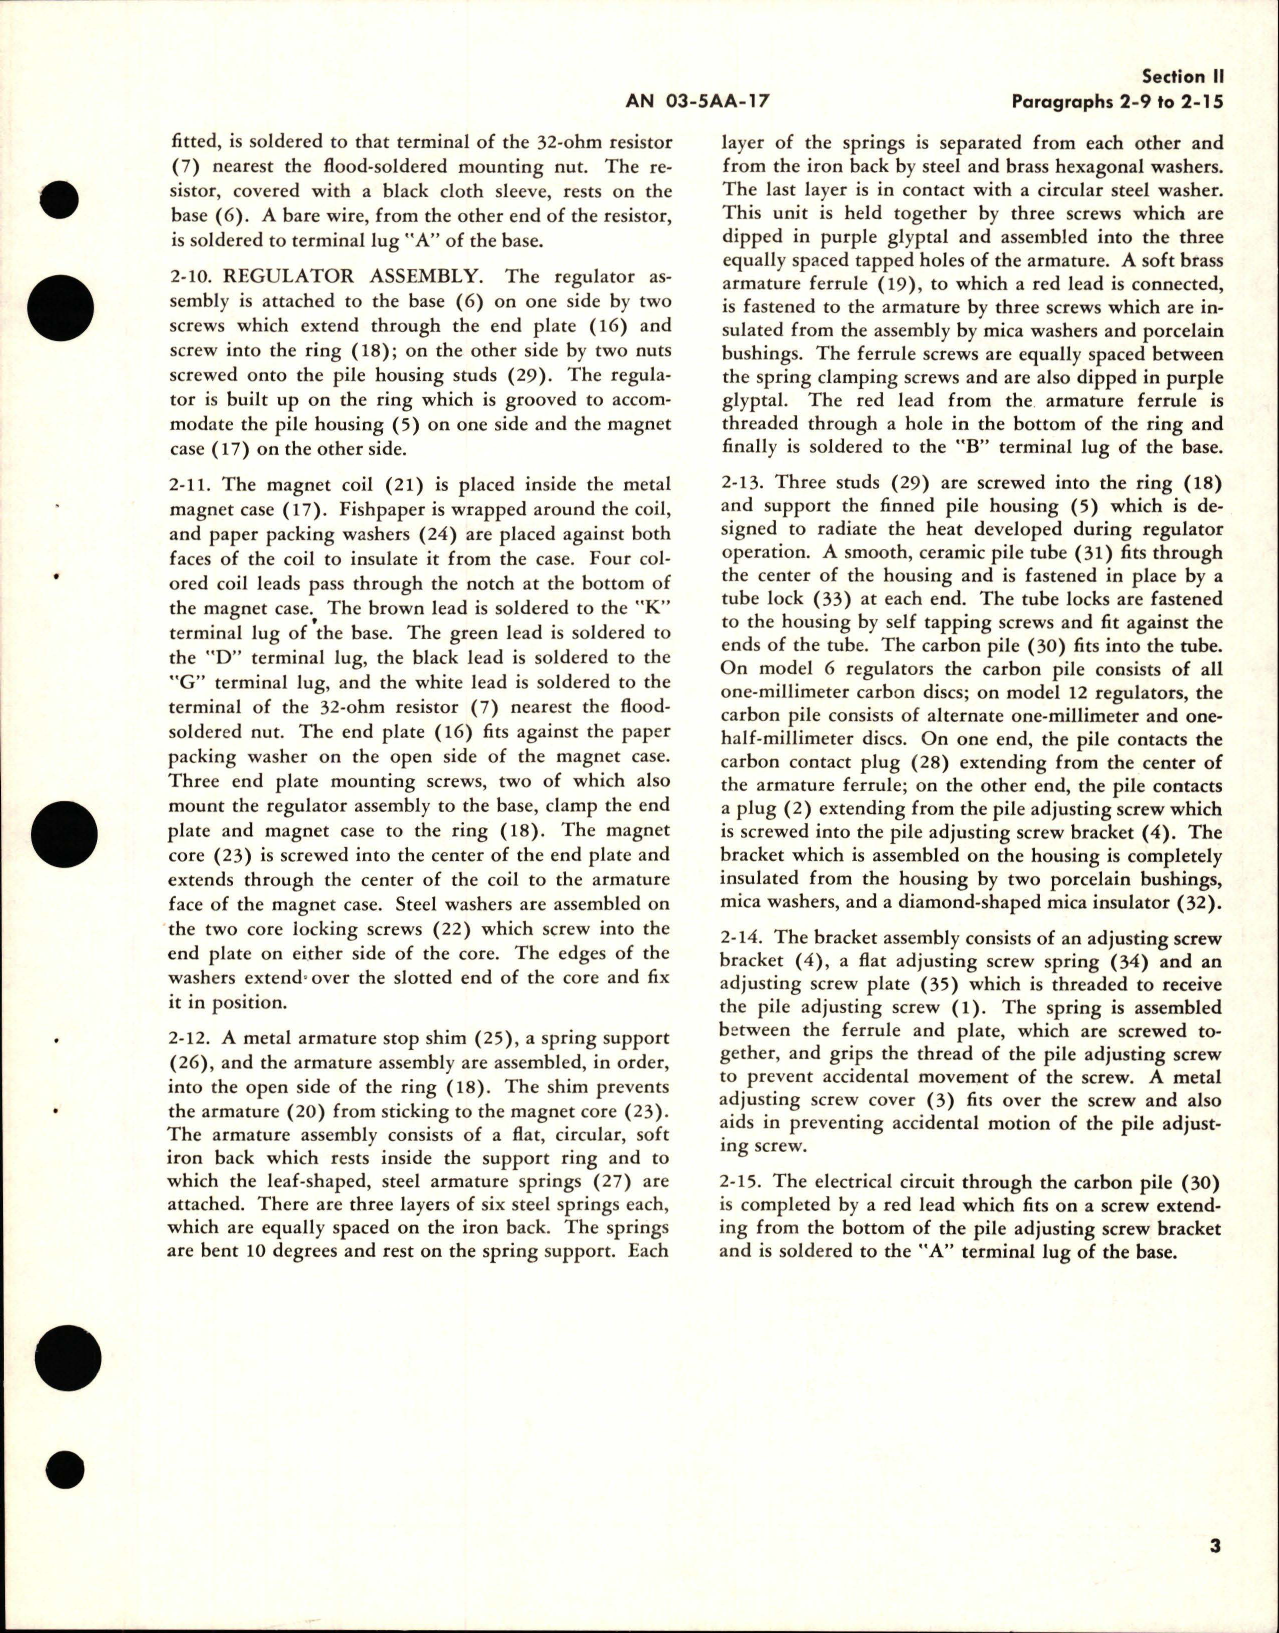 Sample page 7 from AirCorps Library document: Operation, Service, and Overhaul Instructions with Parts Catalog for Carbon Pile Voltage Regulator - 1042-6A and 1042-12A